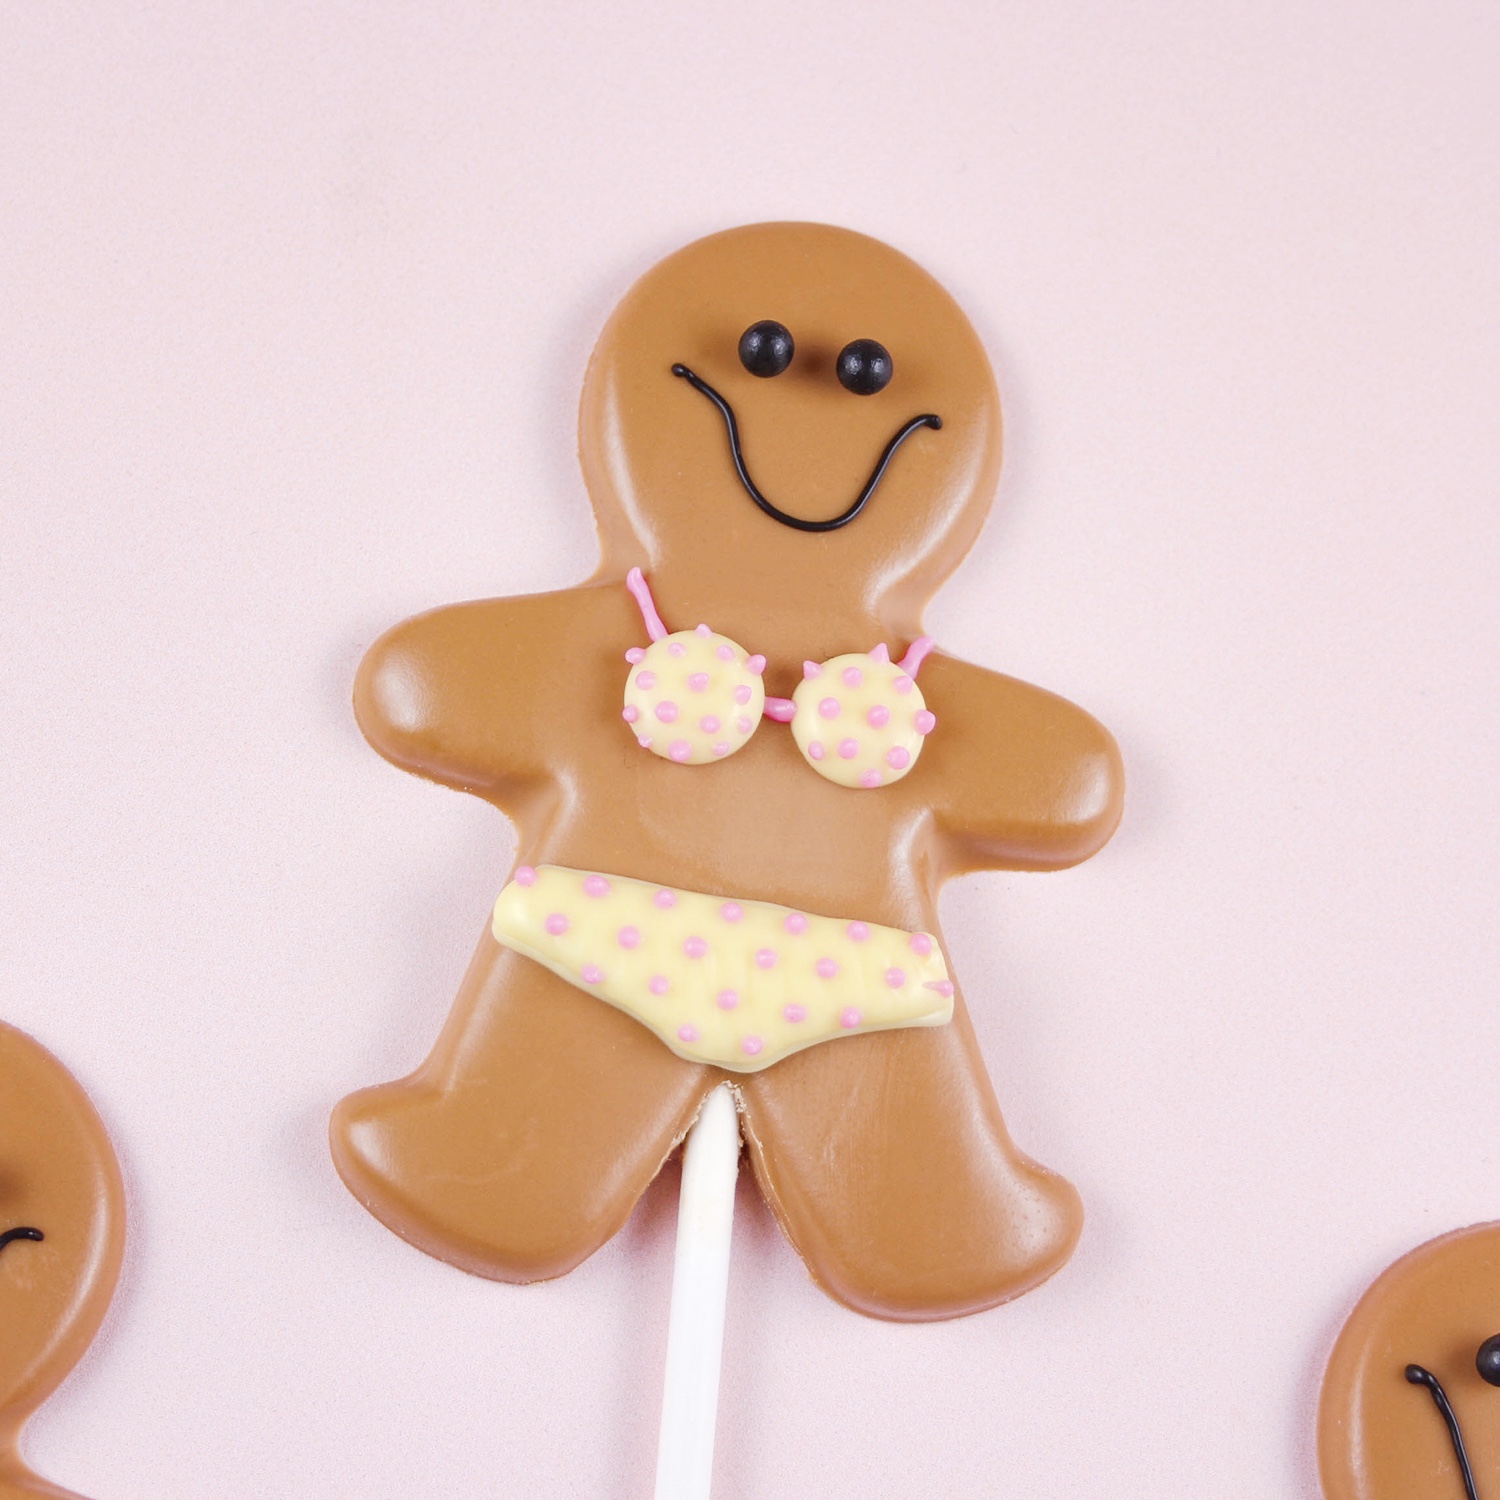 Molded Gingerbread Girl Chocolate pop wearing a bikini decorated with candy writers